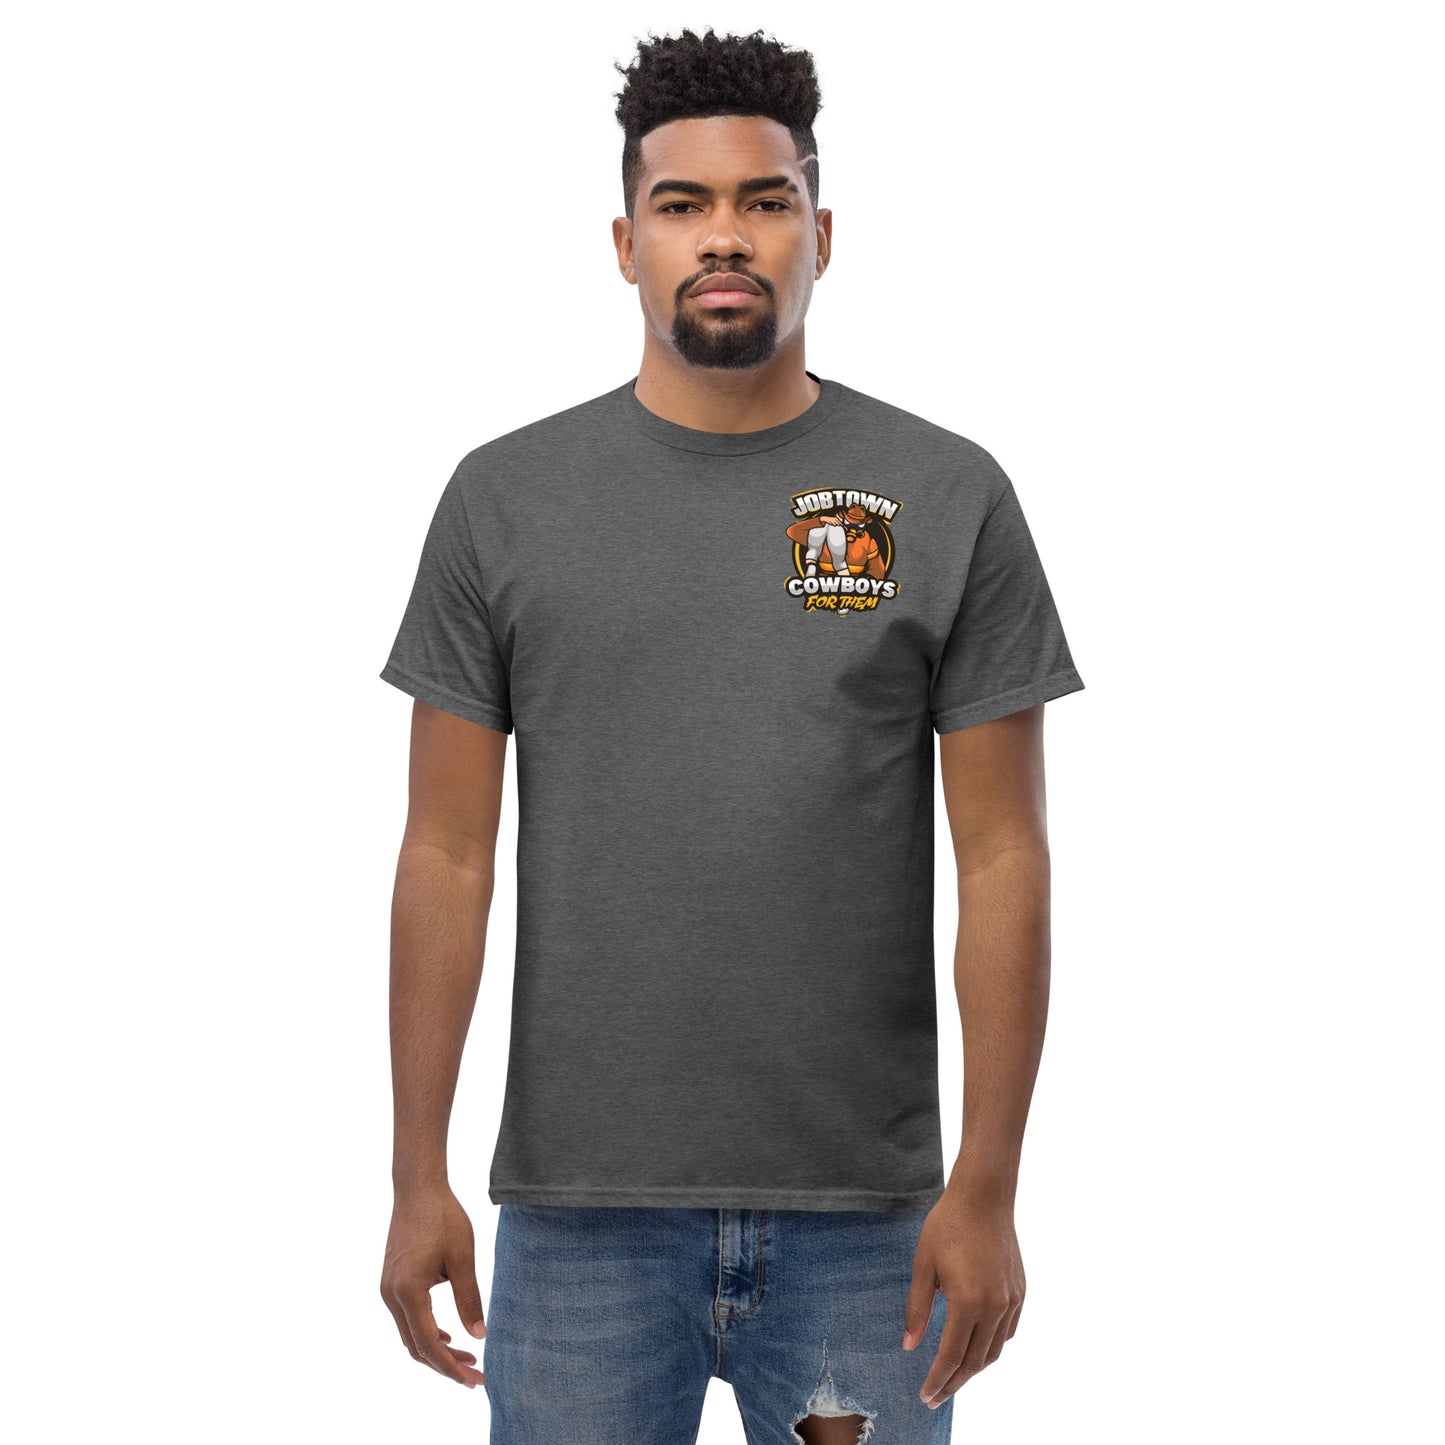 Jobtown Cowboys Firefighter- For Them  classic tee